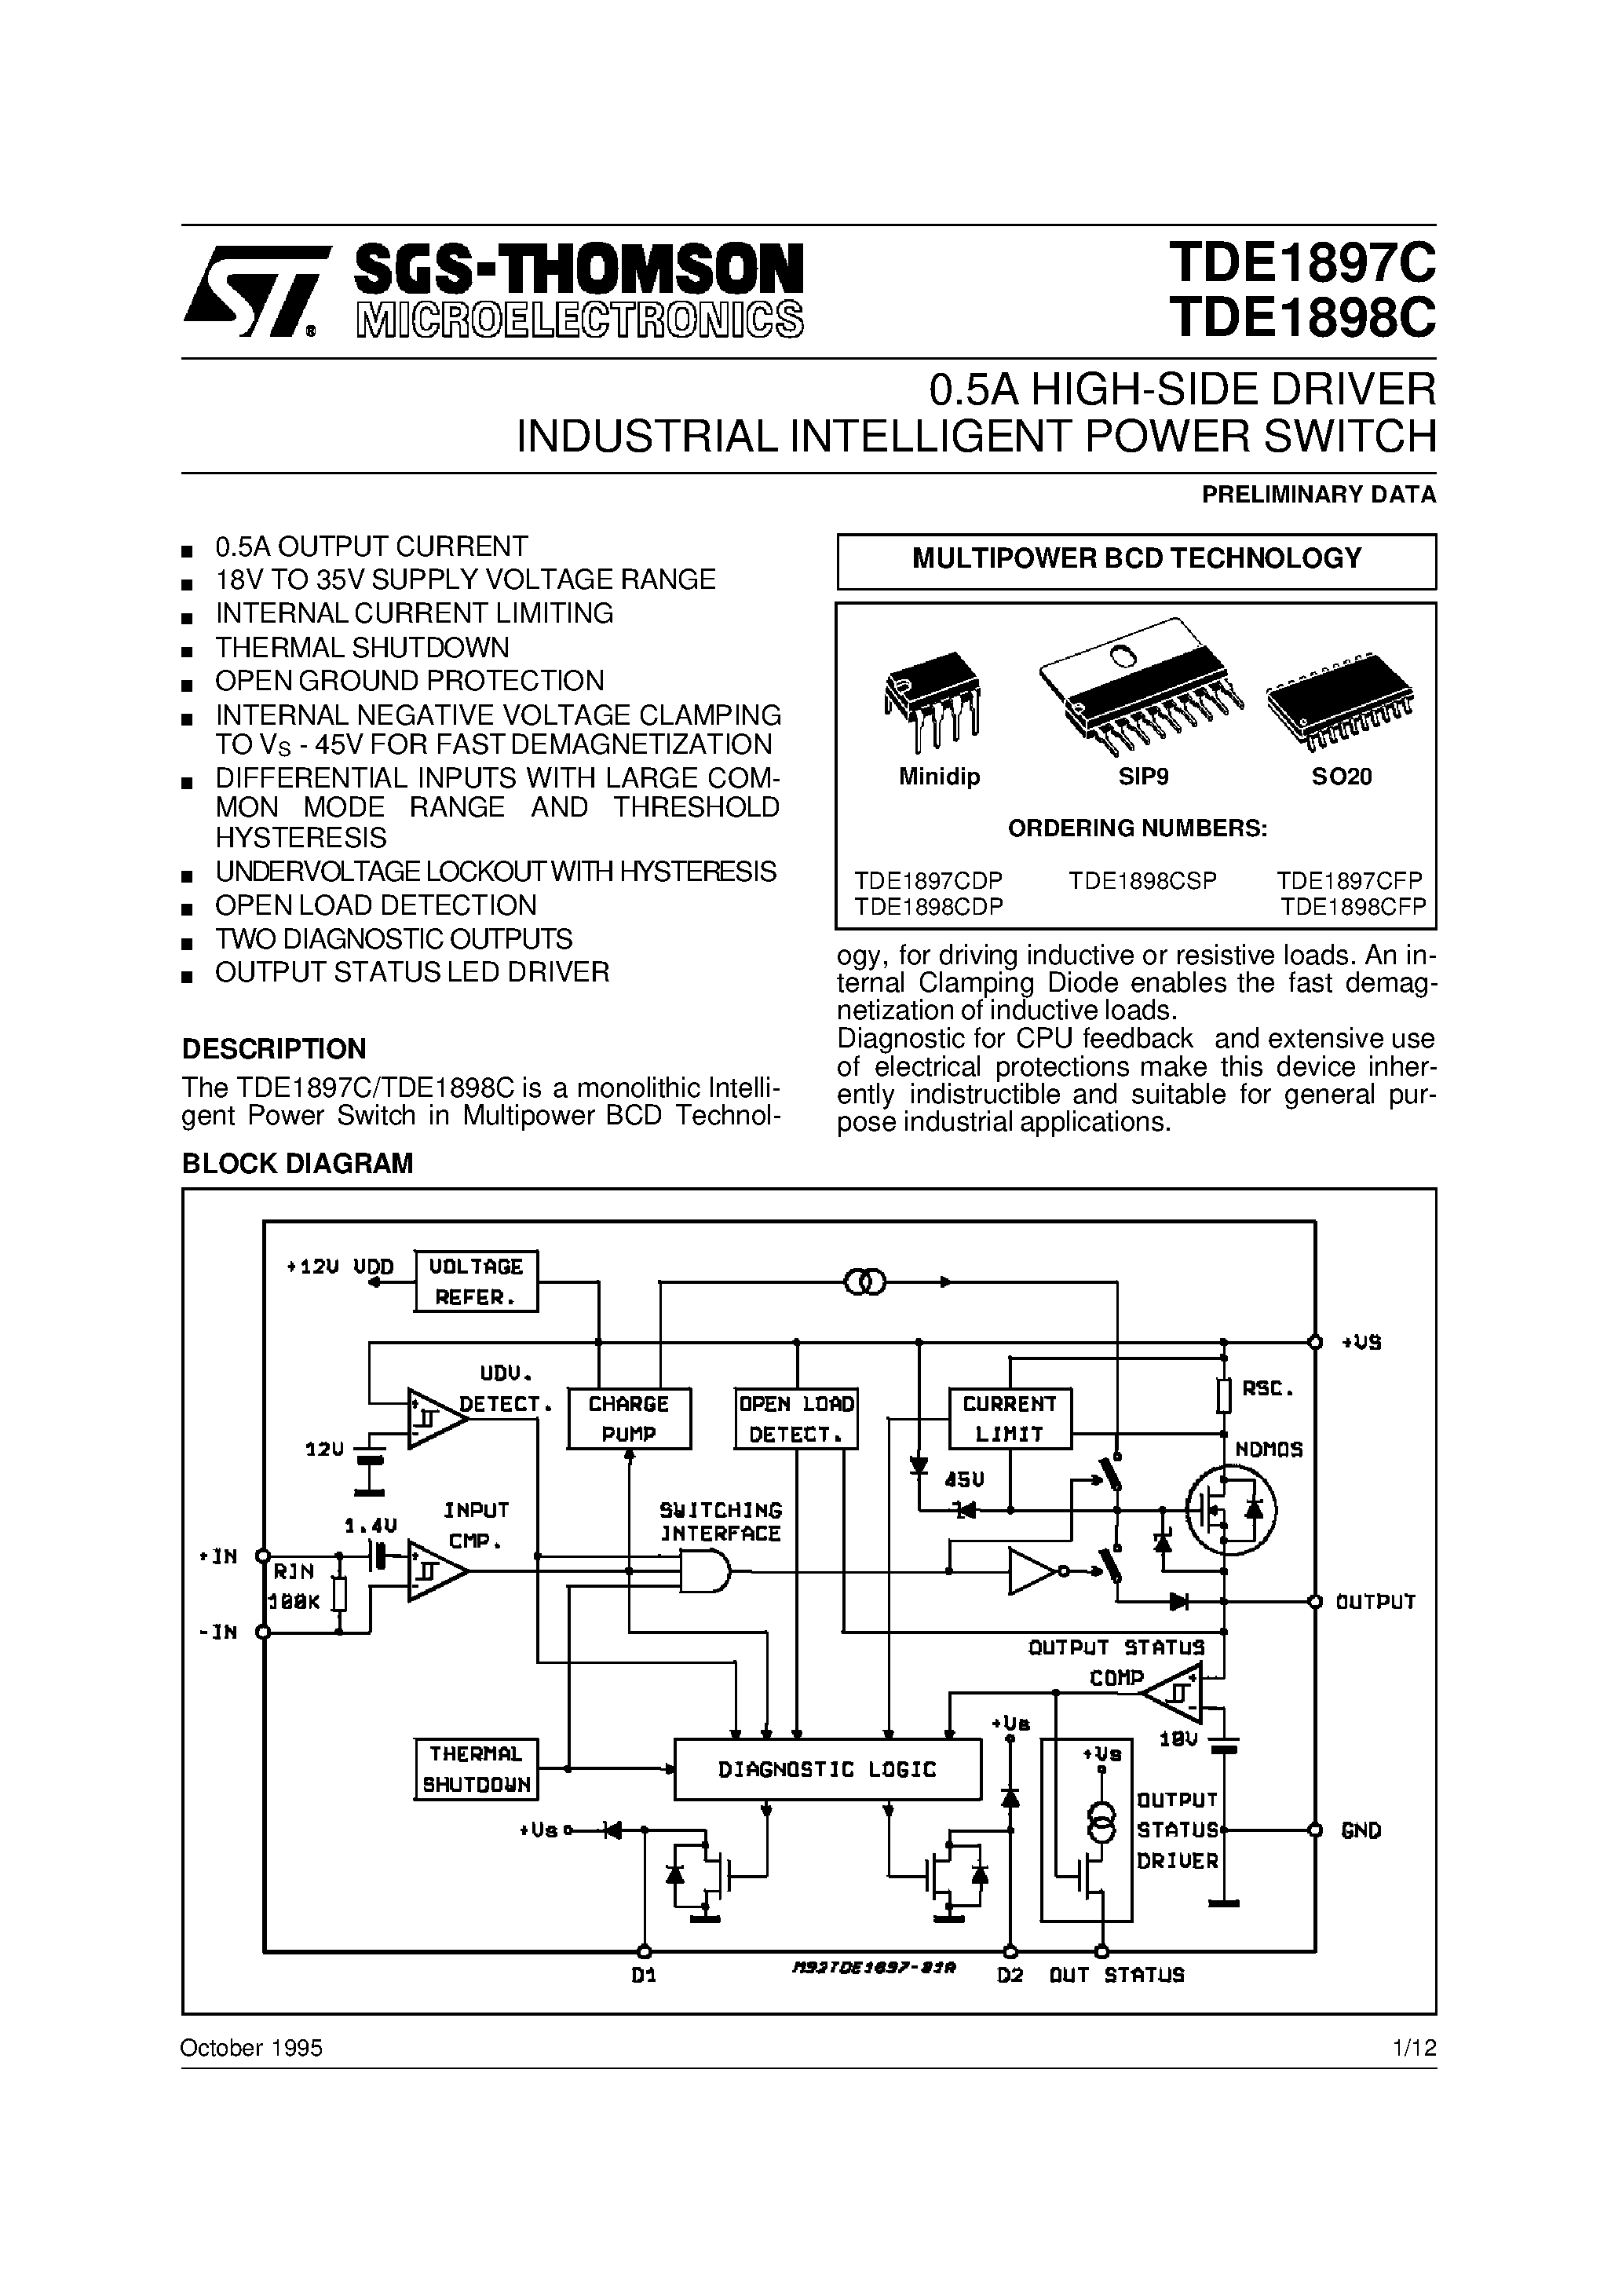 Datasheet TDE1897CDP - 0.5A HIGH-SIDE DRIVER INDUSTRIAL INTELLIGENT POWER SWITCH page 1